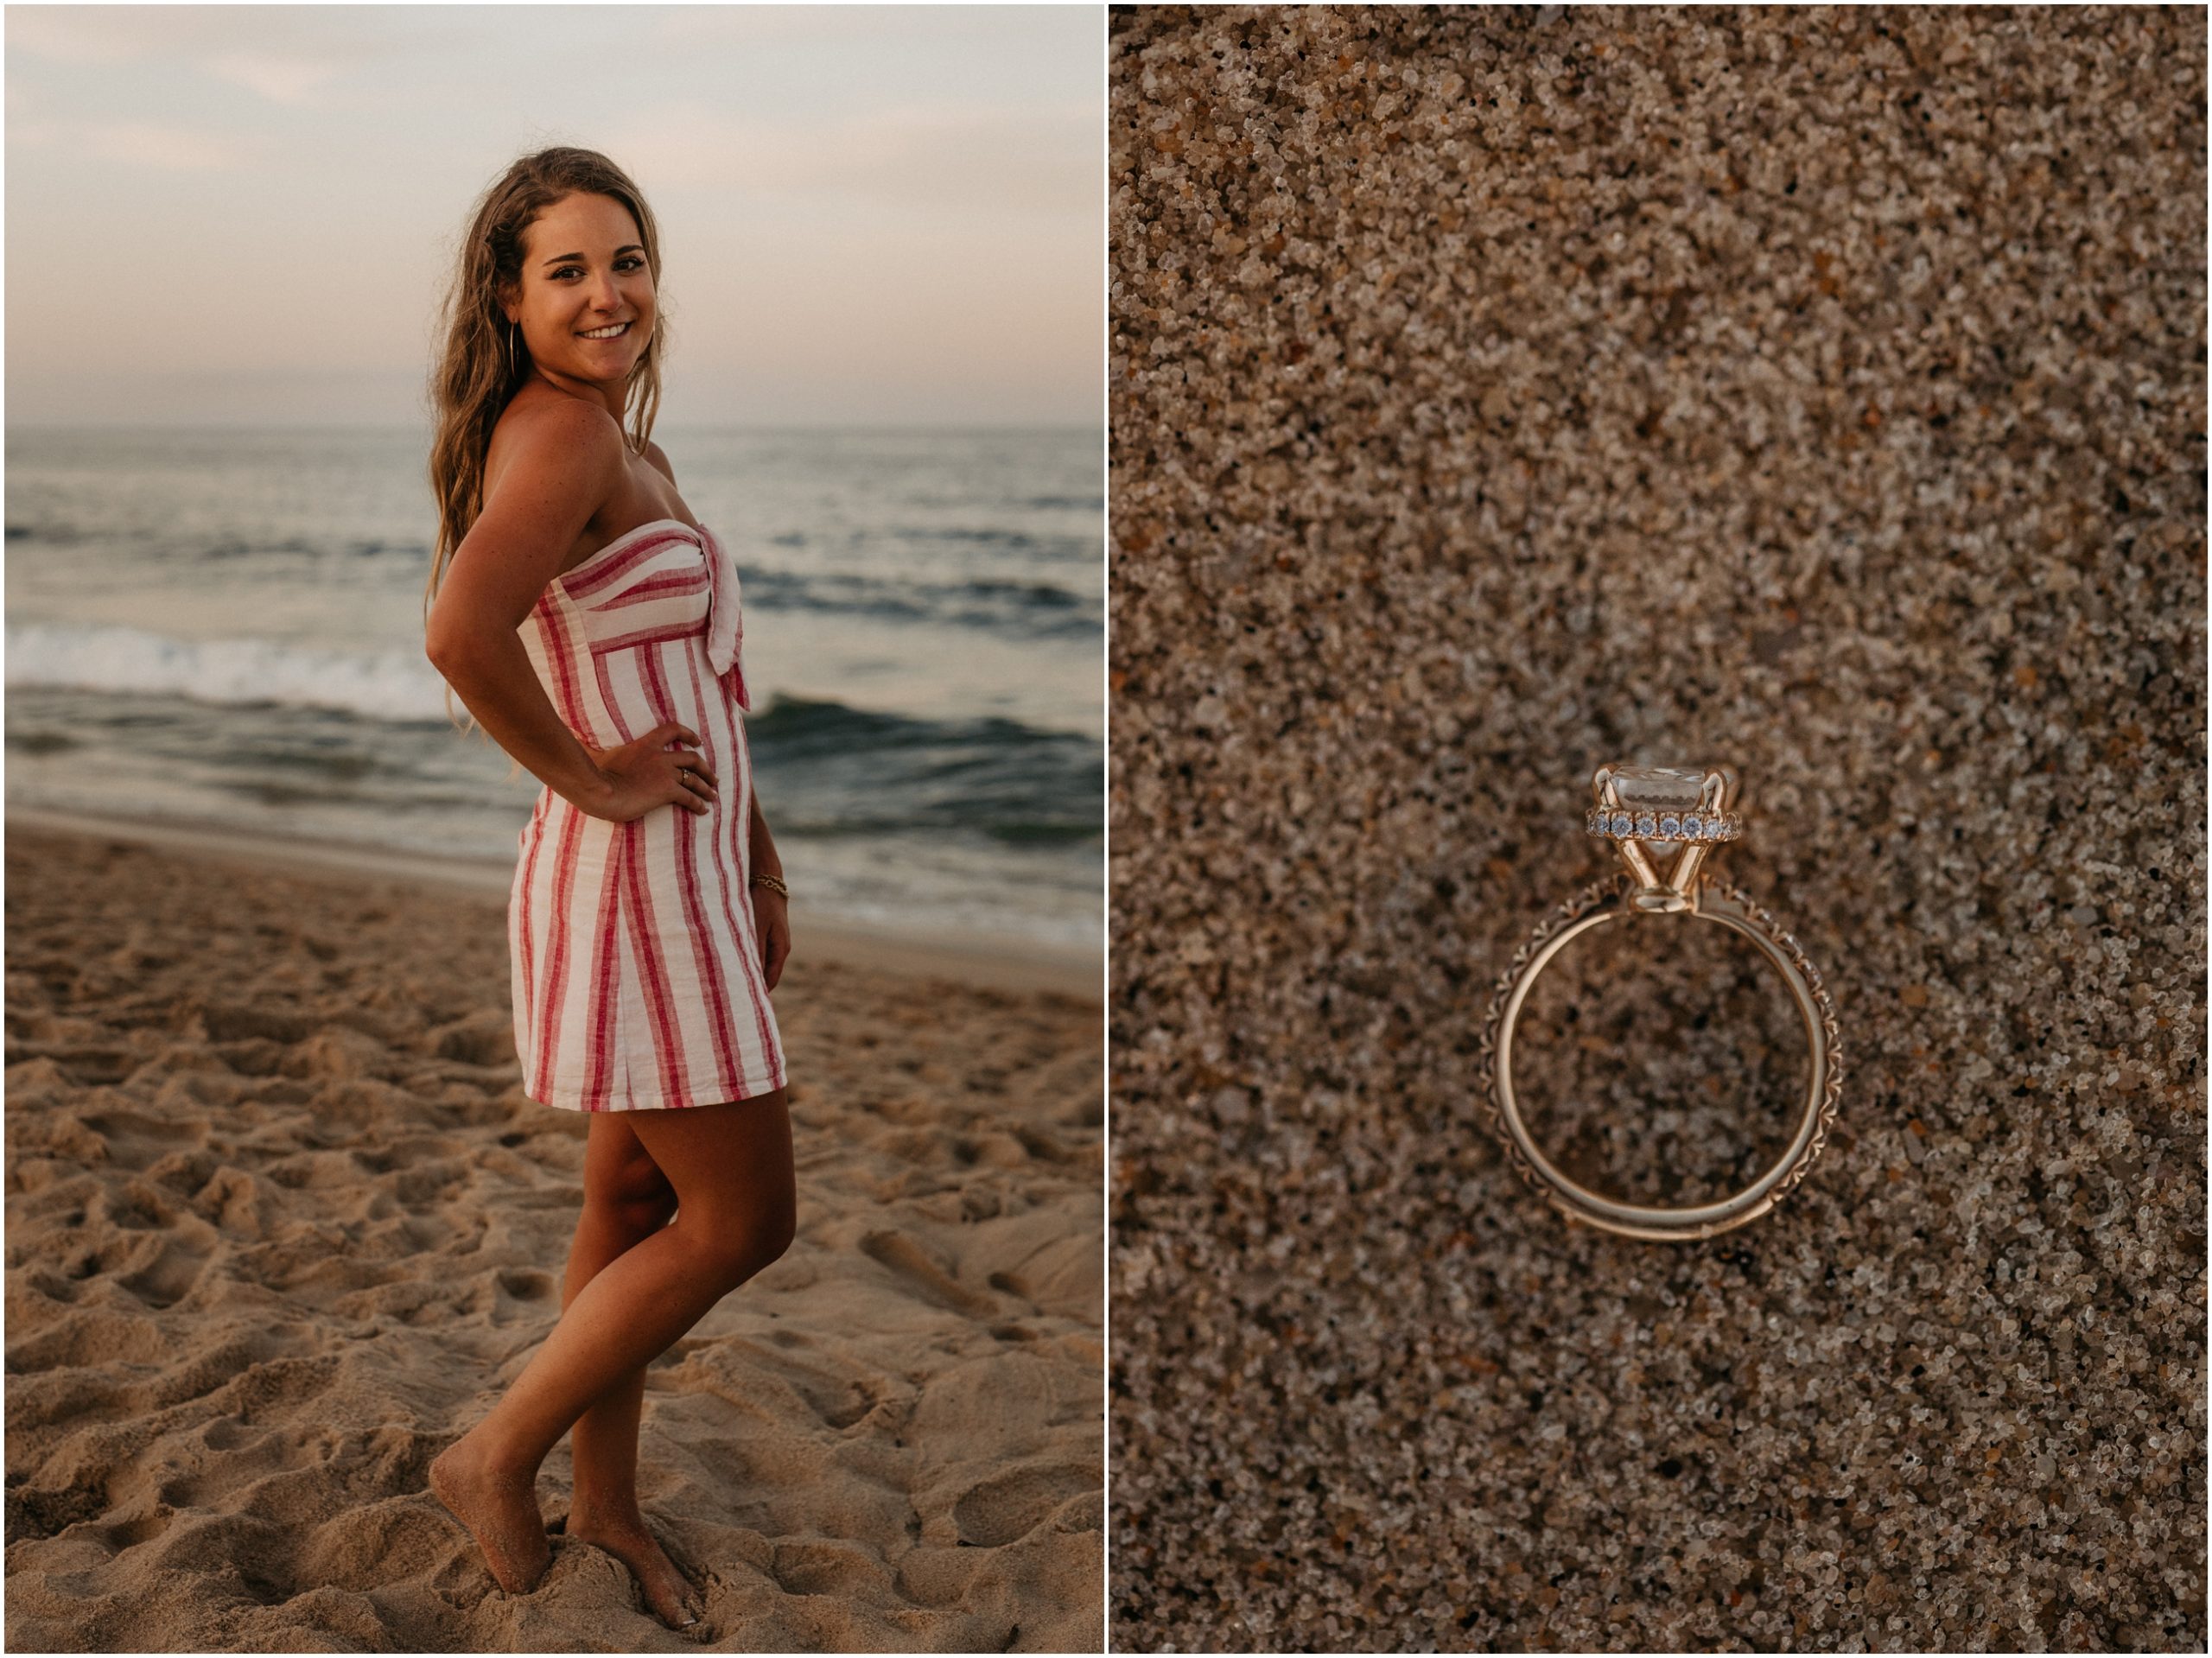 engagement ring on beach sand